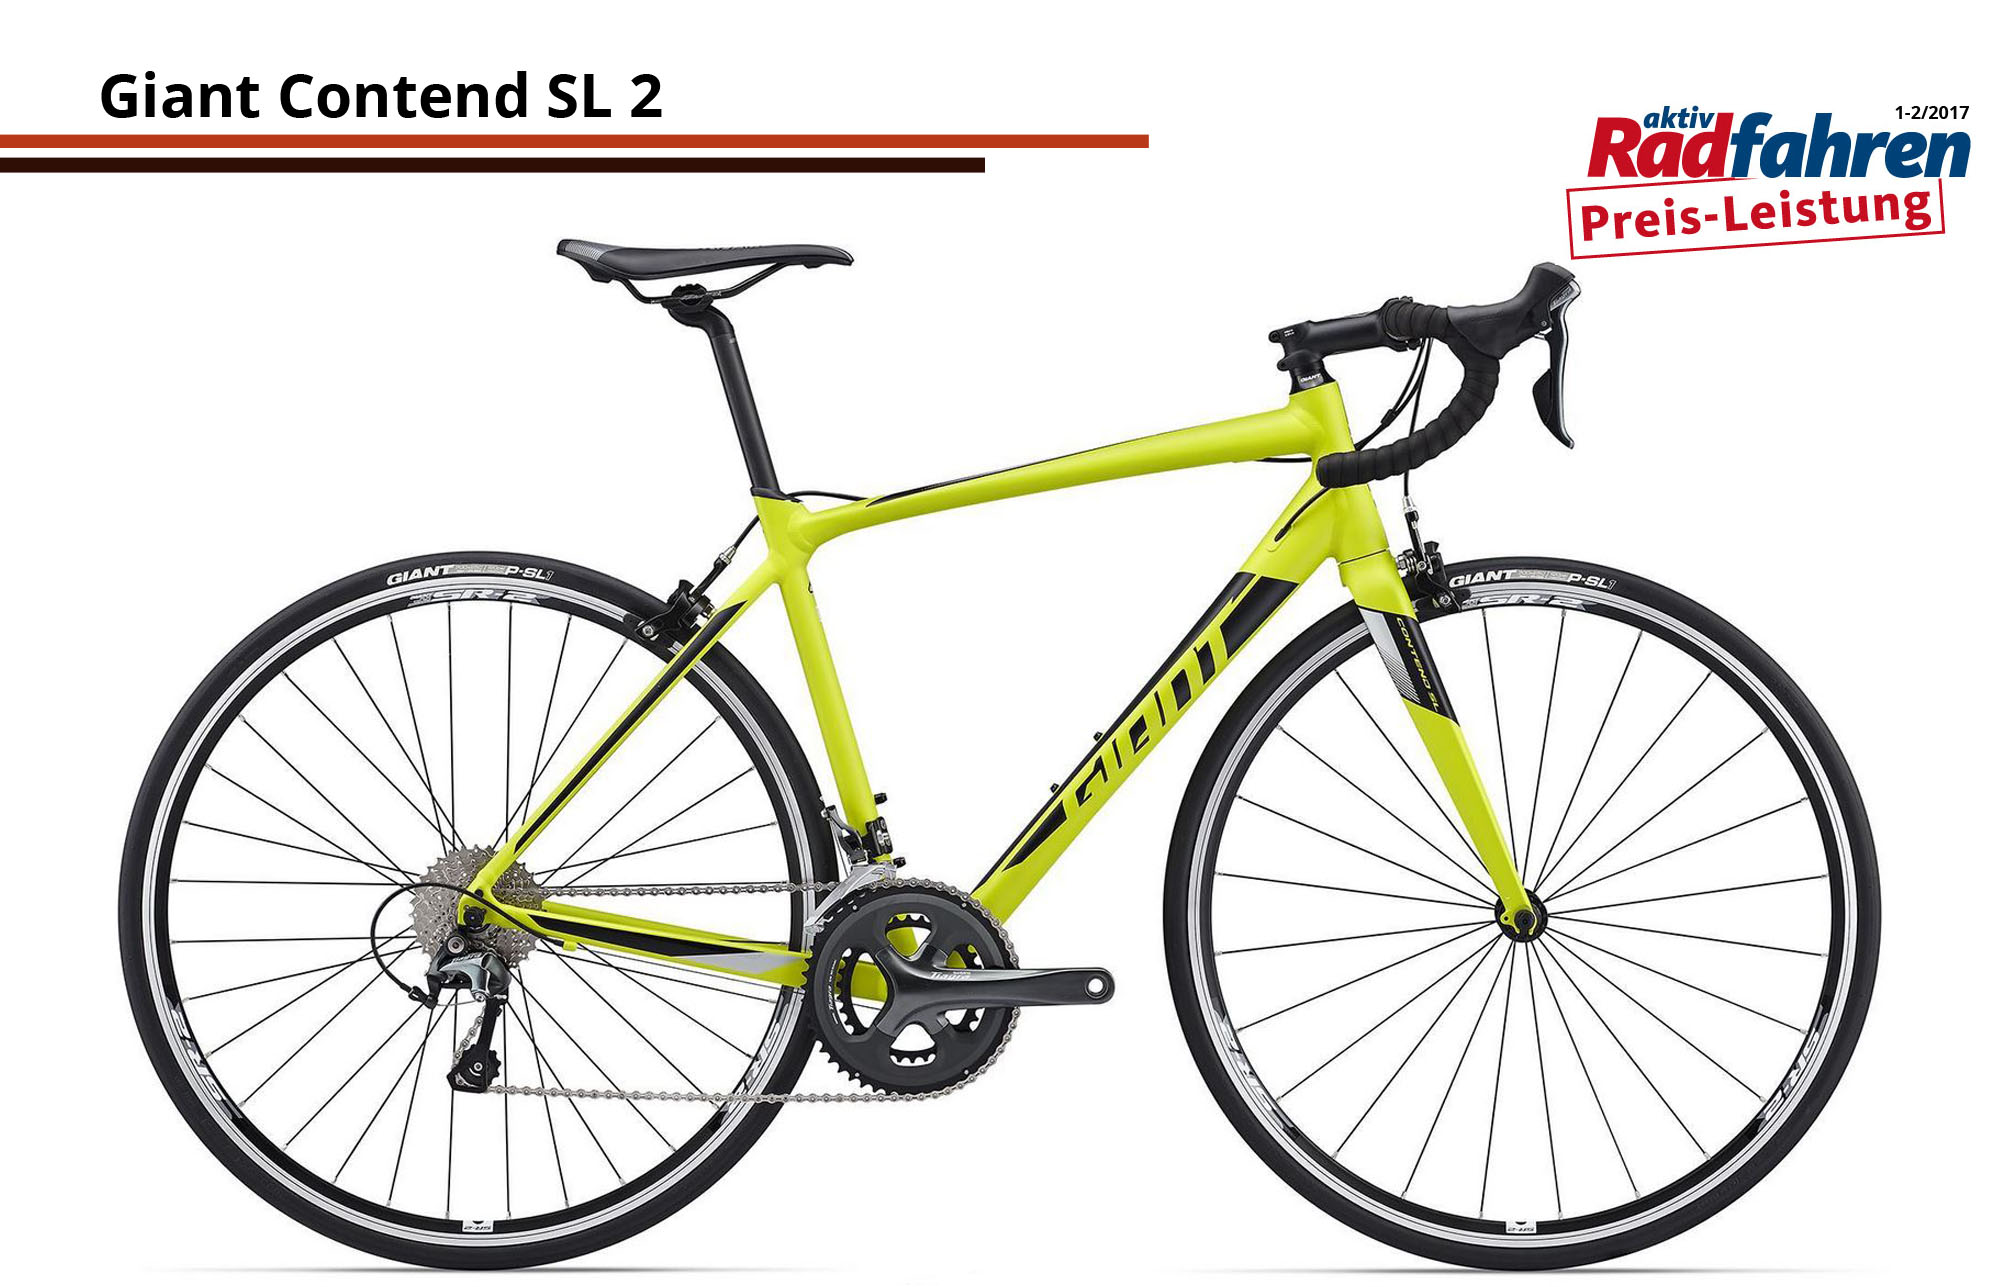 Giant Contend SL 2.